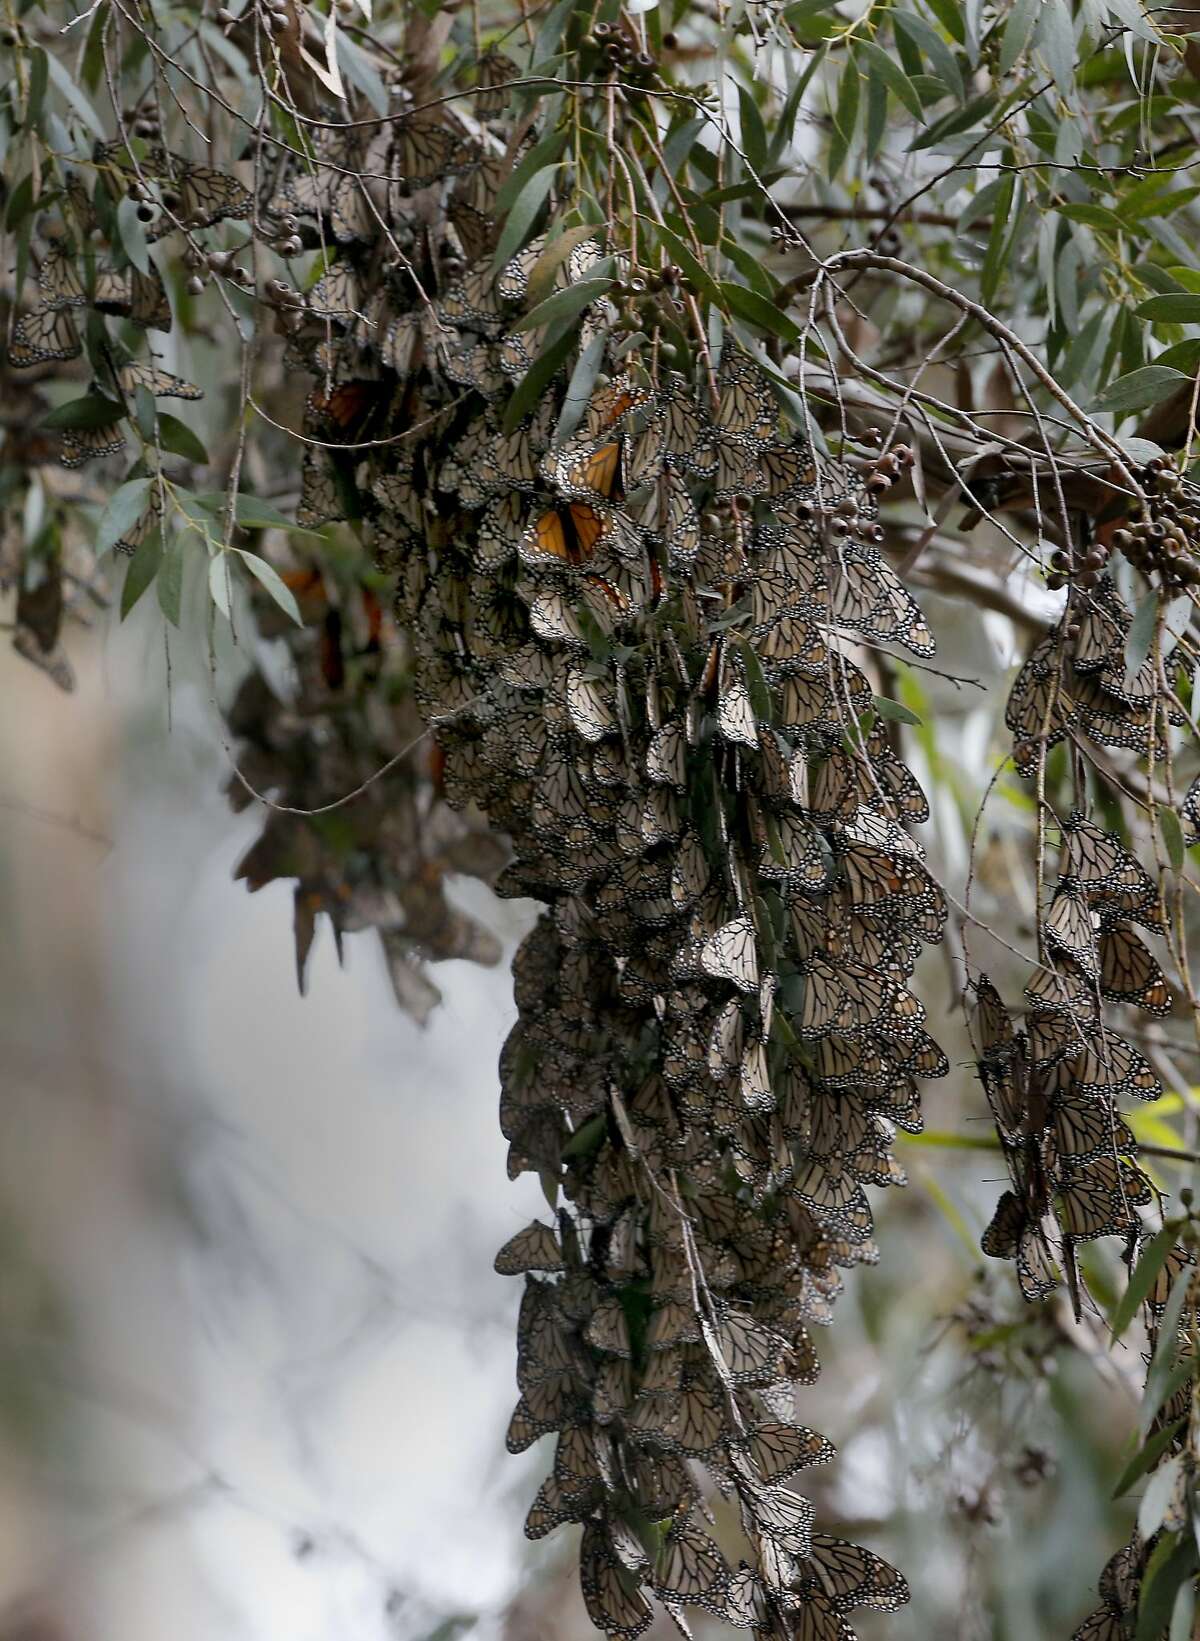 Clusters of Monarch butterflies cling to a blooming eucalyptus tree at the Natural Bridges State Beach Sunday February 2, 2014 in Santa Cruz, Calif. Mexico scientists have noted a 43 percent drop in the monarch butterfly population that is wintering in that area. There may also be an increase in the numbers of monarchs wintering in California.